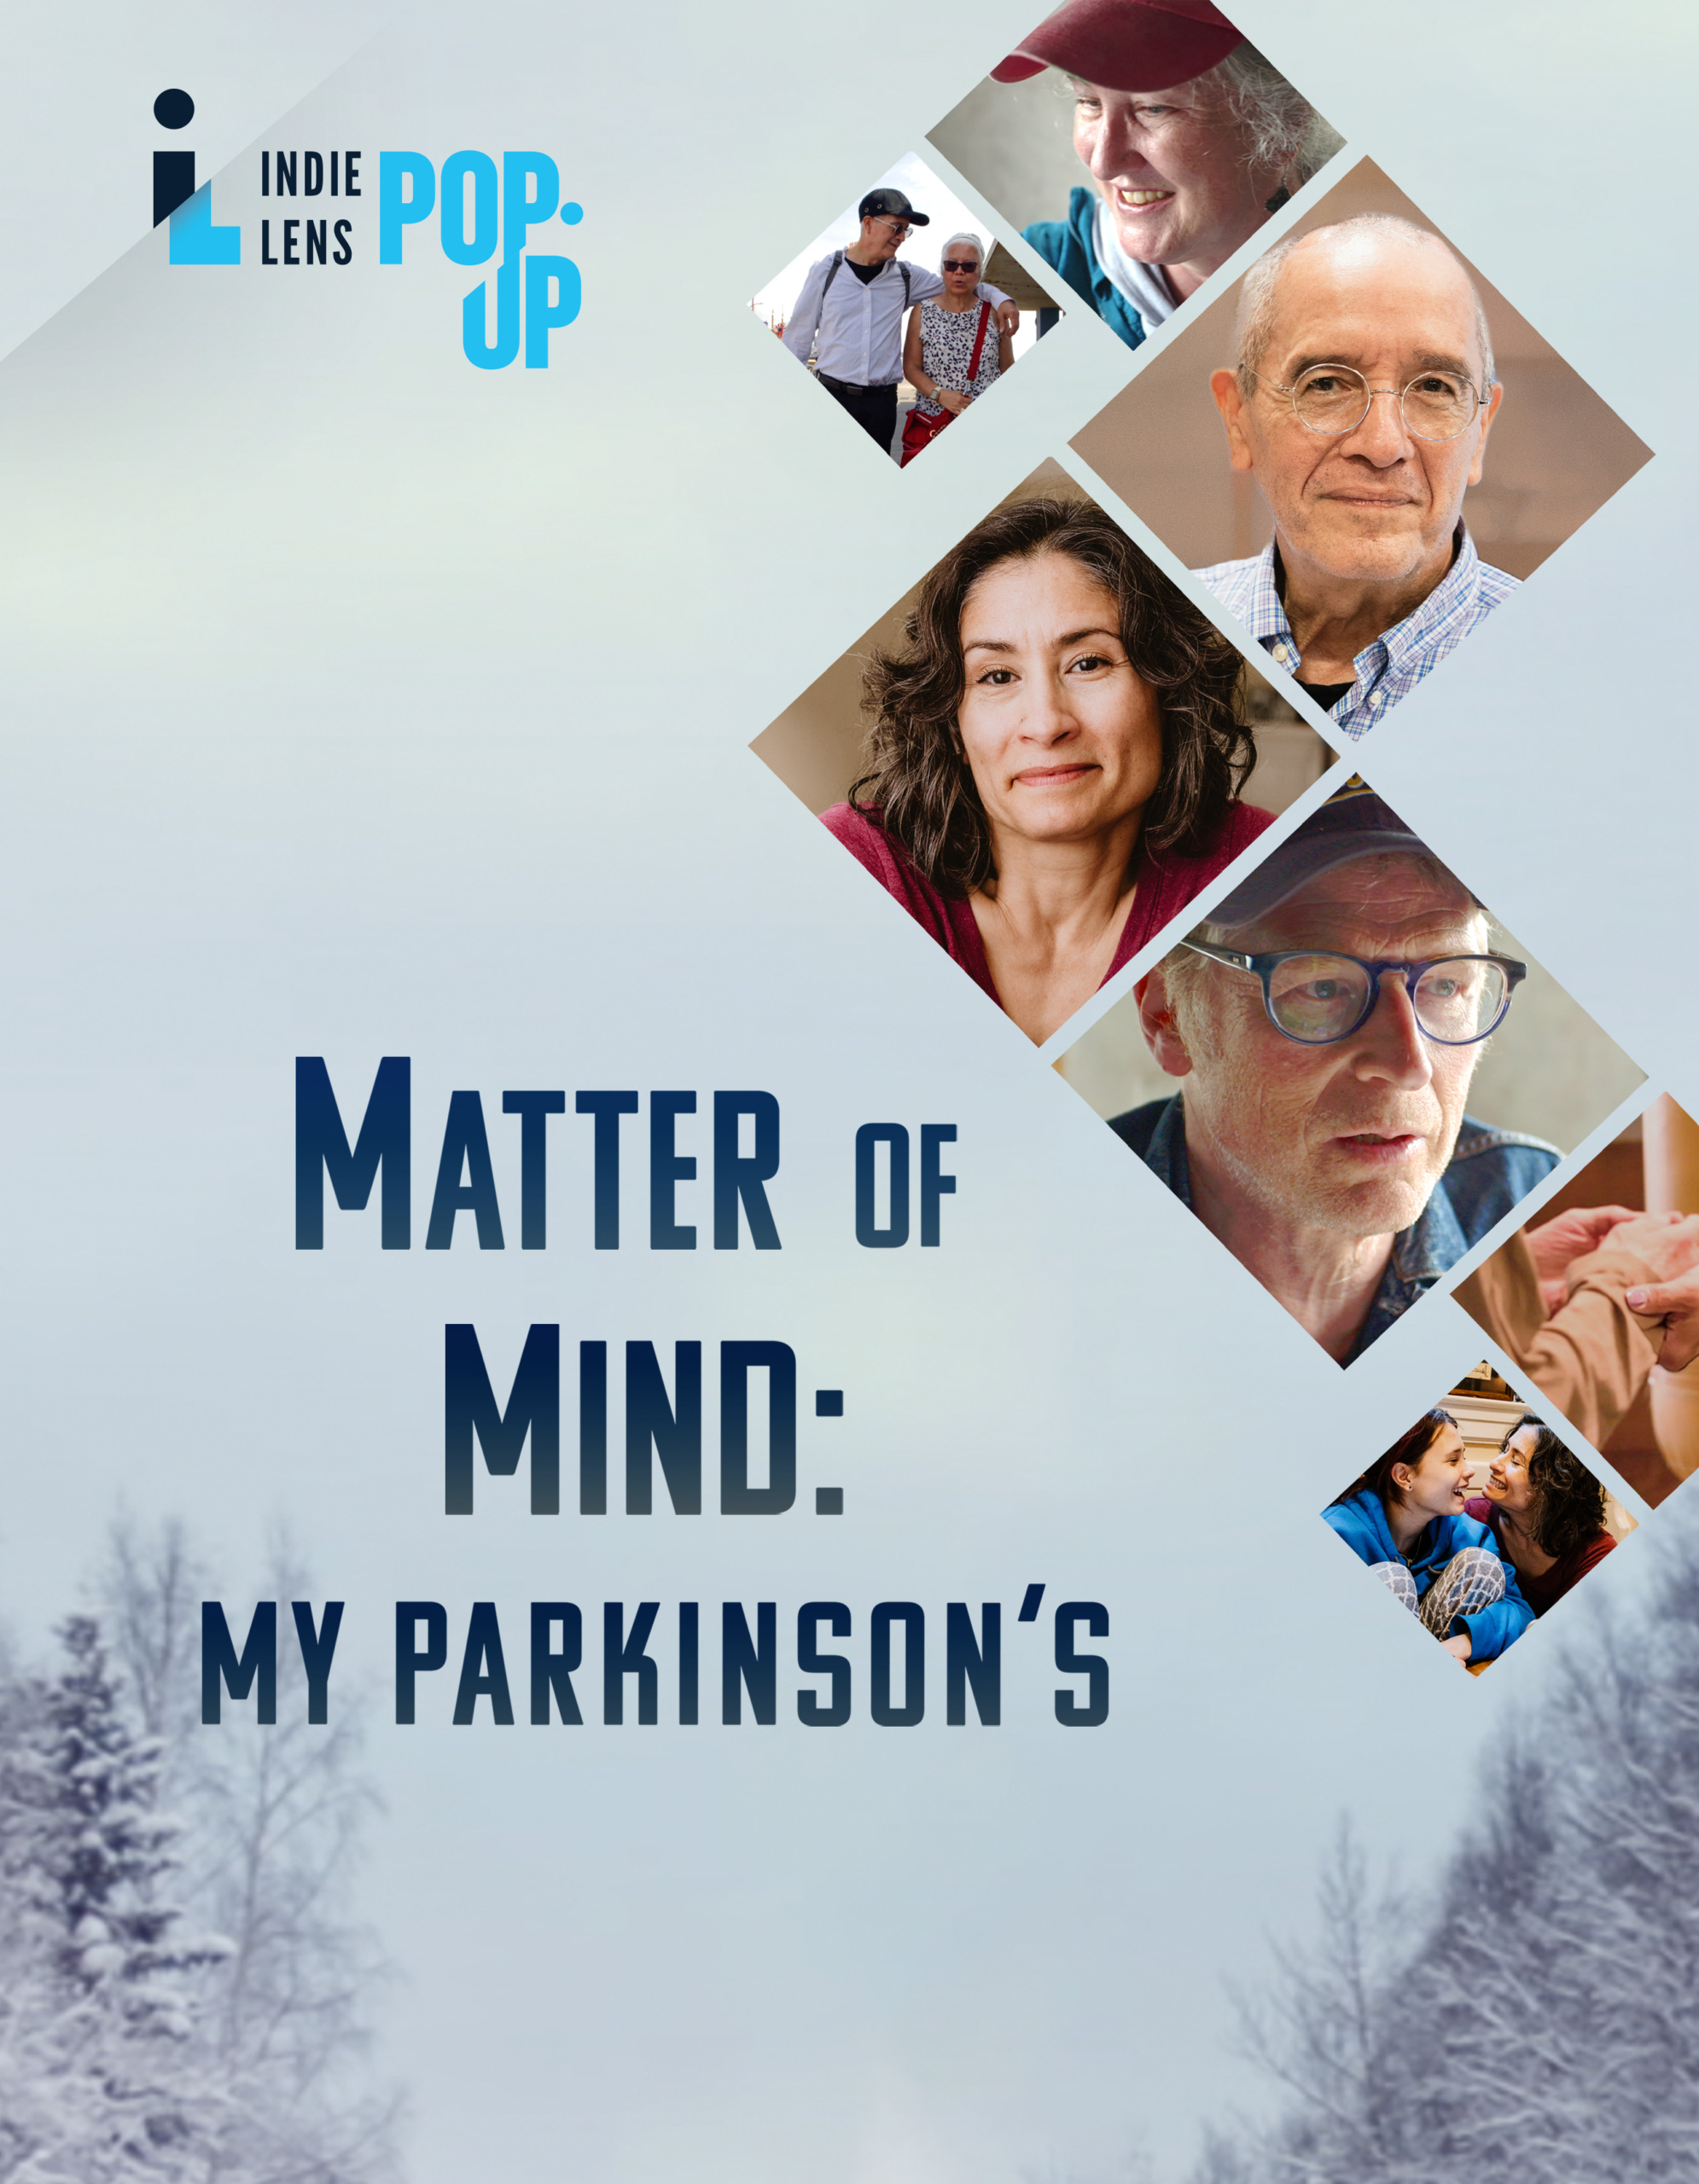 Film promotional image. Indie Lens Pop Up logo upper left hand corner. Matter of Mind: My Parkinson's (film title) center left. The background is snowy landscape. There are diamonds with the faces of the subject of the films in it along the right hand side. Individuals featured in the image are older men and a middle-aged woman with dark hair. 